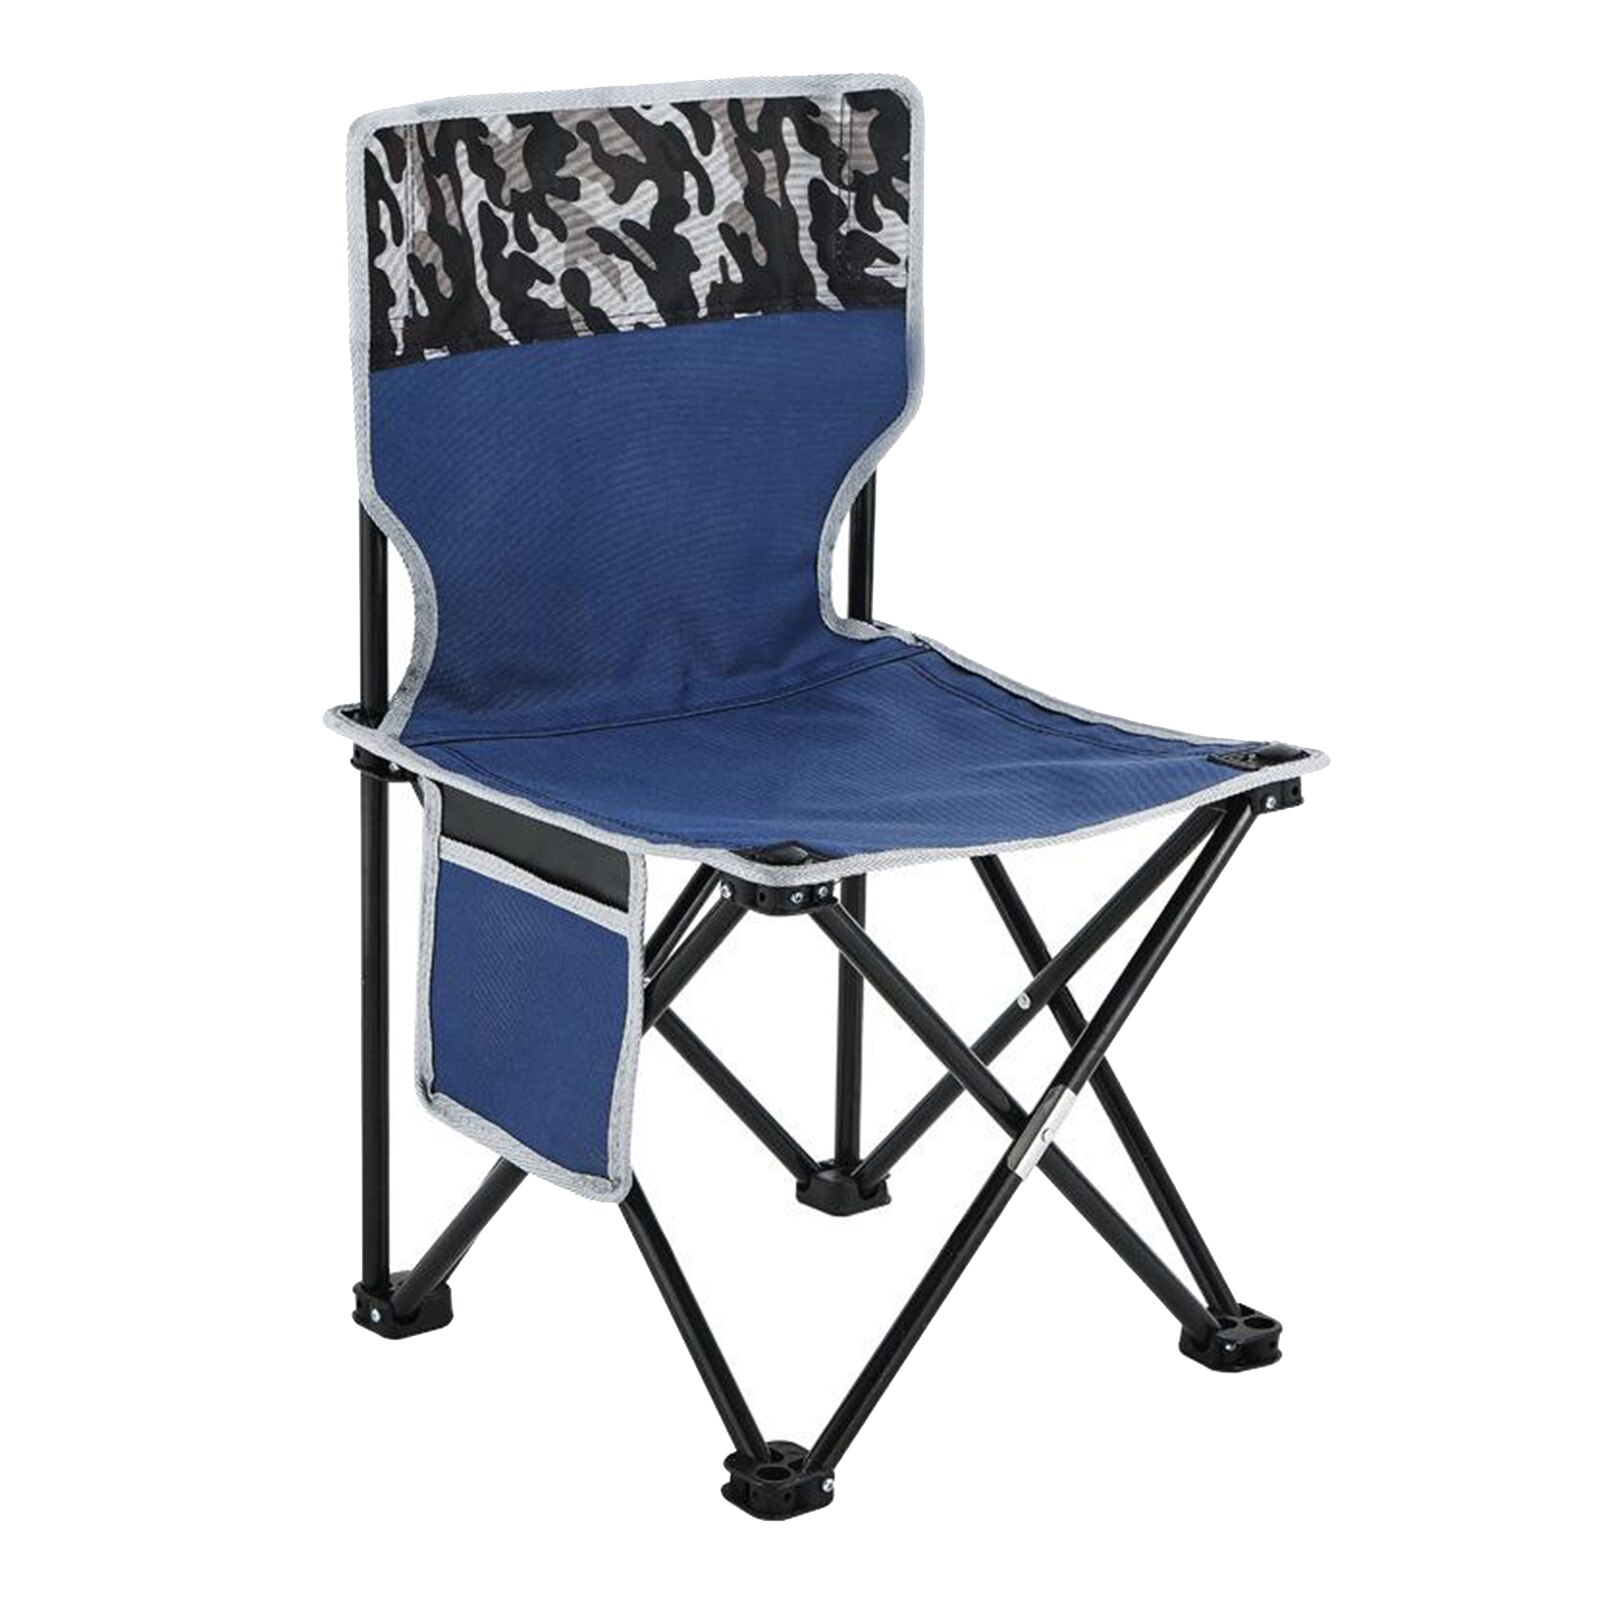 Reinforced Folding Camping Chairs, Foldable Lawn Picnic BBQ Picnic Backrest: Camo XL